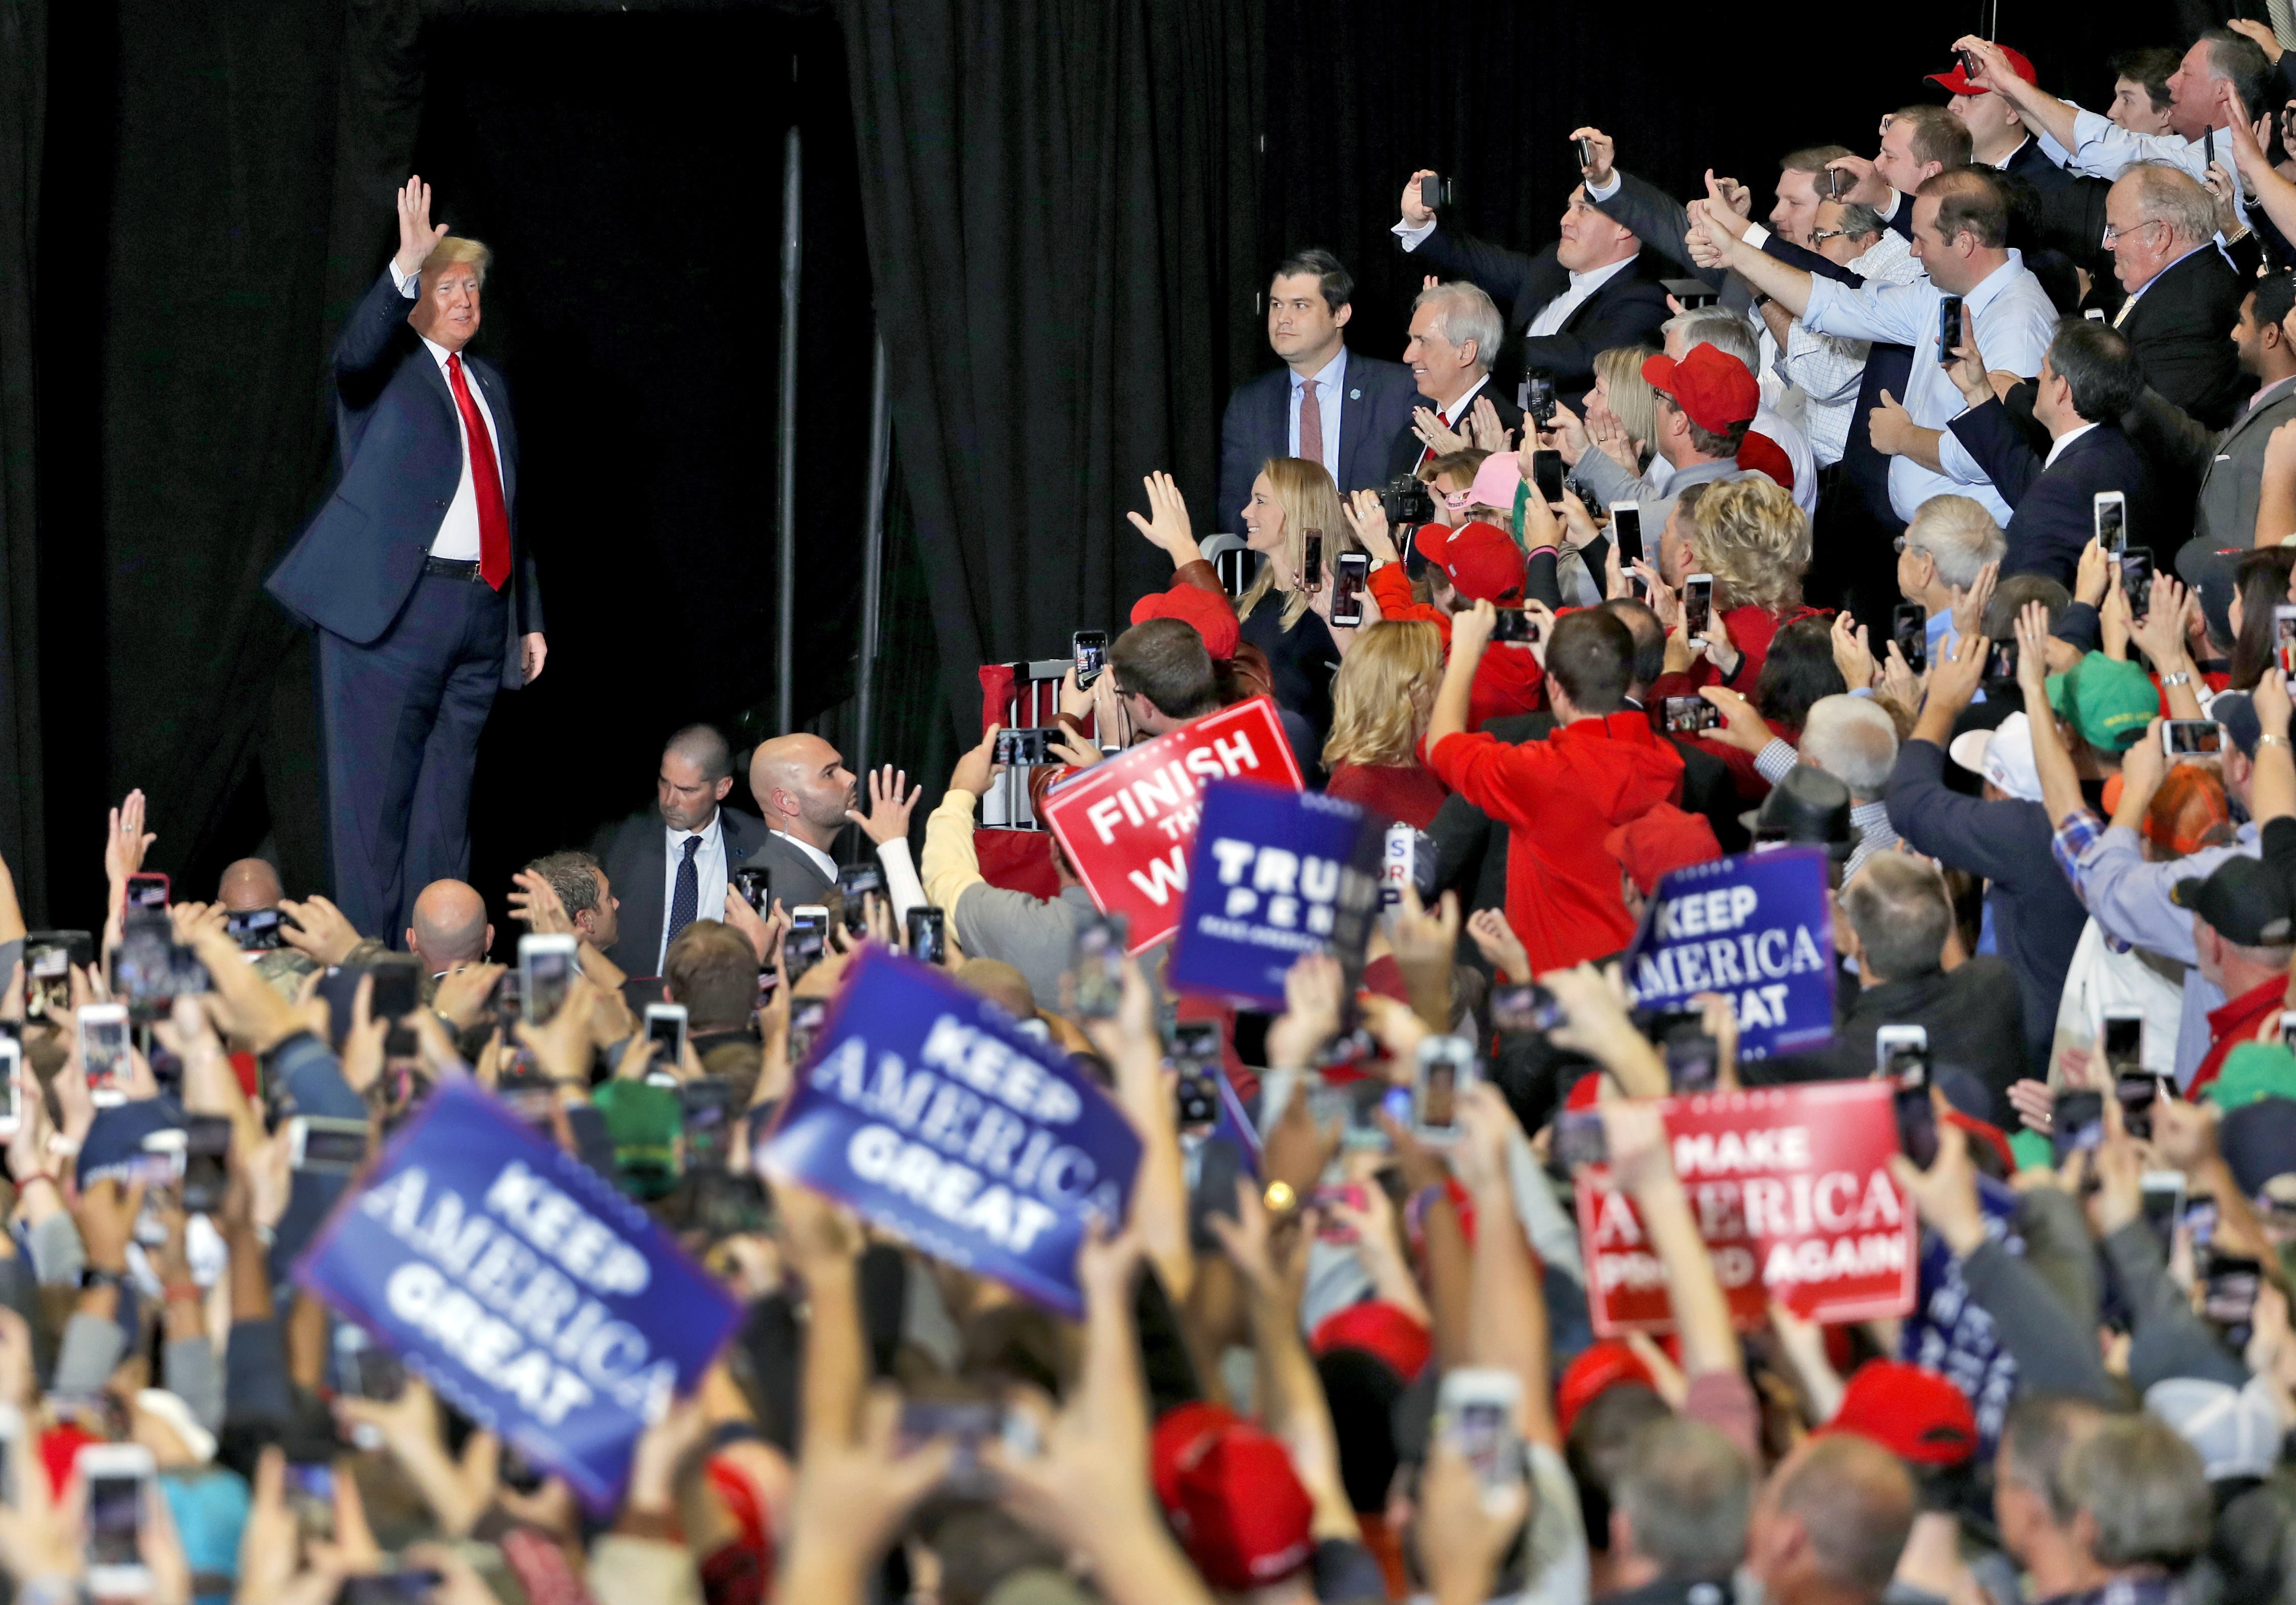 President Donald Trump waves to supporters after being introduced during a campaign rally on November 5 in Cape Girardeau, Missouri. Photo: AP